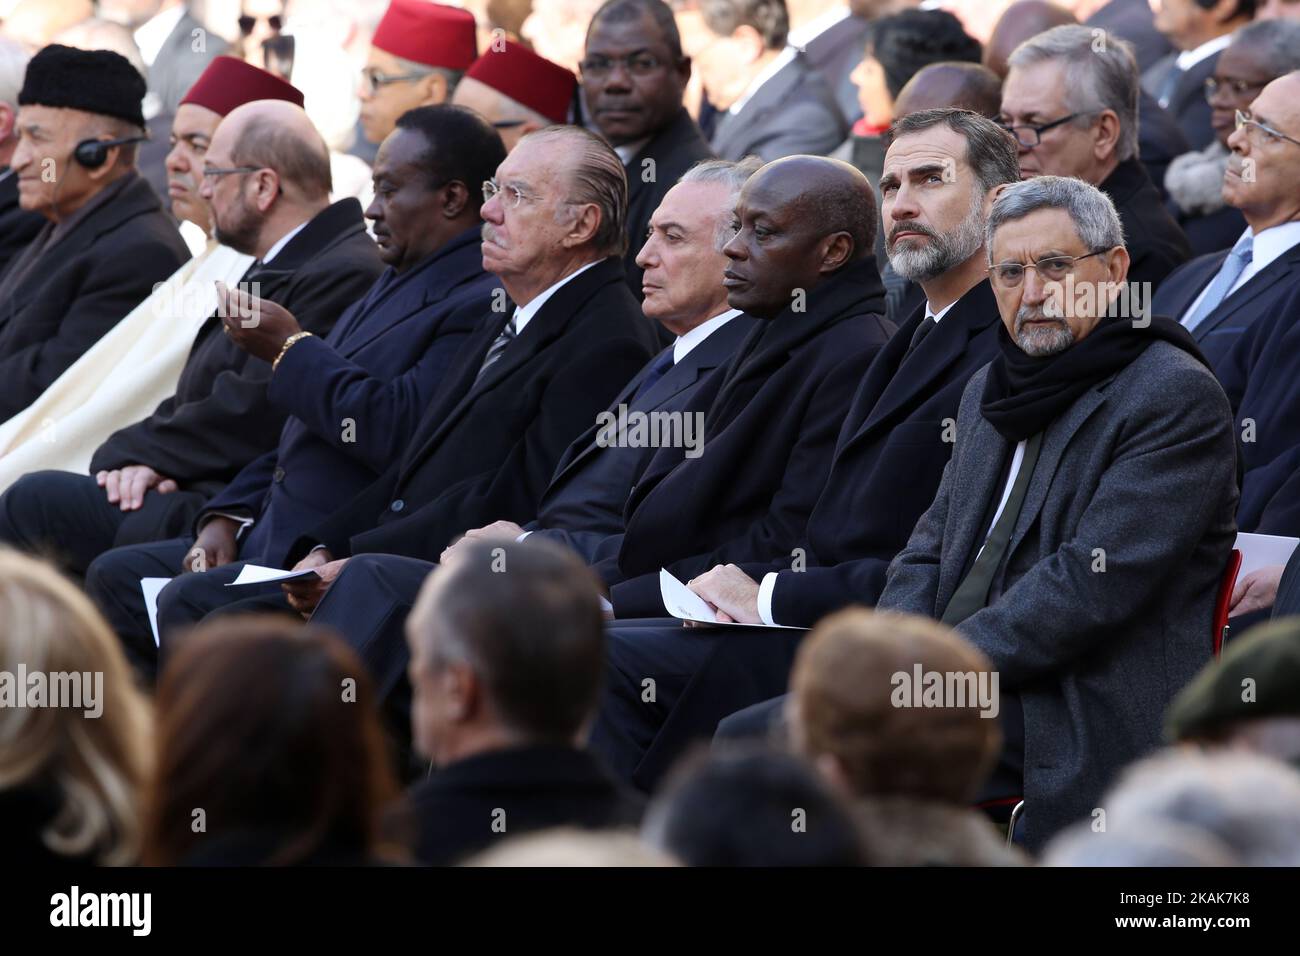 From R to L - Cape Verde President Jorge Carlos Fonseca , King Felipe VI of Spain, President of Guinea Bissau Jose Mario Vaz, Brazilian President Michel Temer and Former Brazilian President Jose Sarnei attend the funeral ceremony for the late former Portuguese President Mario Soares at the Jeronimos Monastery in Lisbon, on January 10, 2017. The founder of Portugal's Socialist Party, who served as president from 1986-96, died in hospital on January 7, 2017. ( Photo by Pedro Fiuza/NurPhoto) *** Please Use Credit from Credit Field ***  Stock Photo